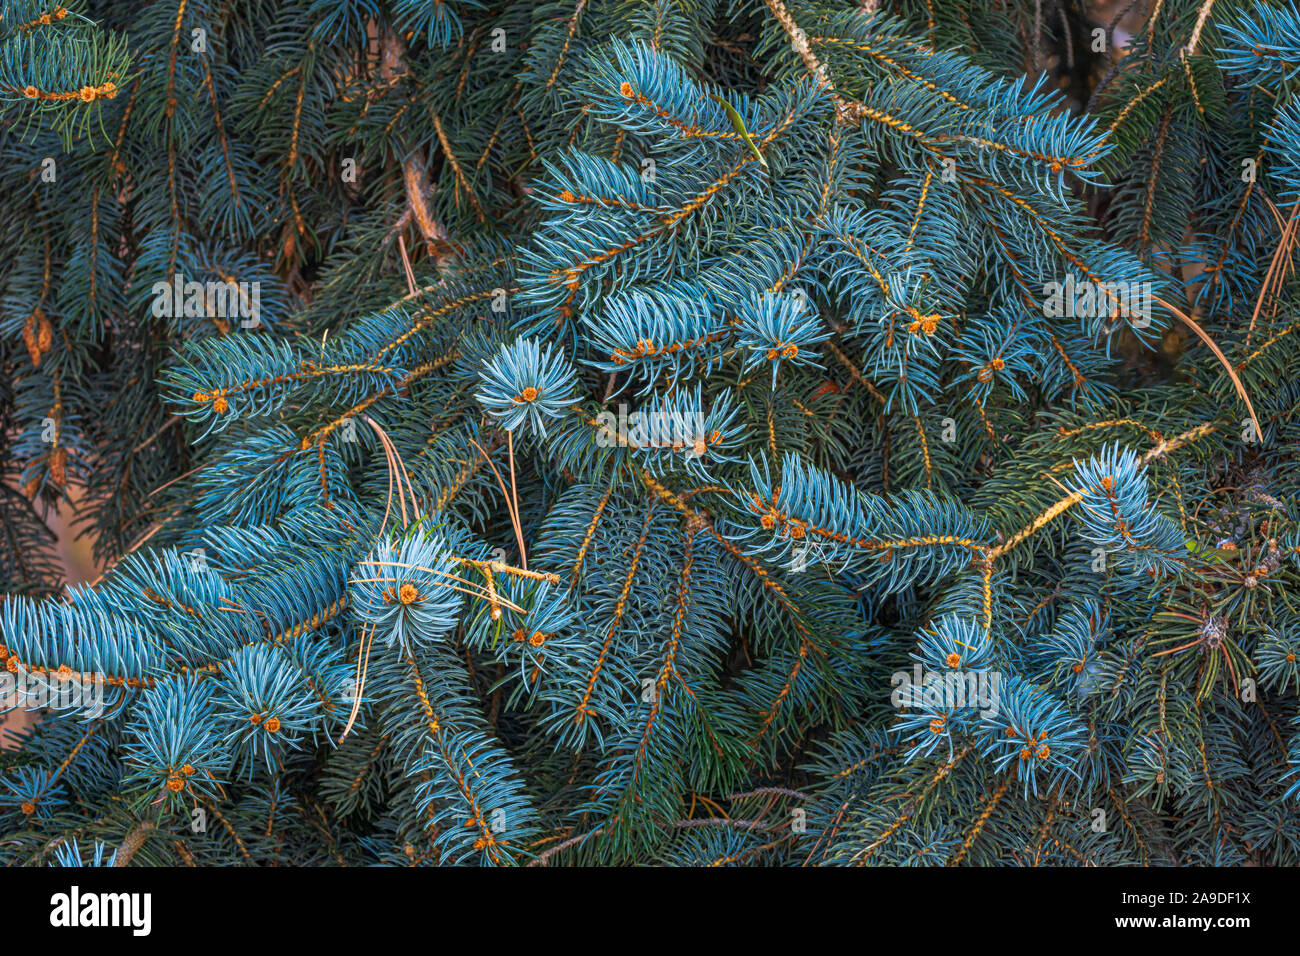 Detail of Colorado Blue Spruce (Picea pungens) pine ranches and needles, Castle Rock Colorado US. Photo taken in October. Stock Photo